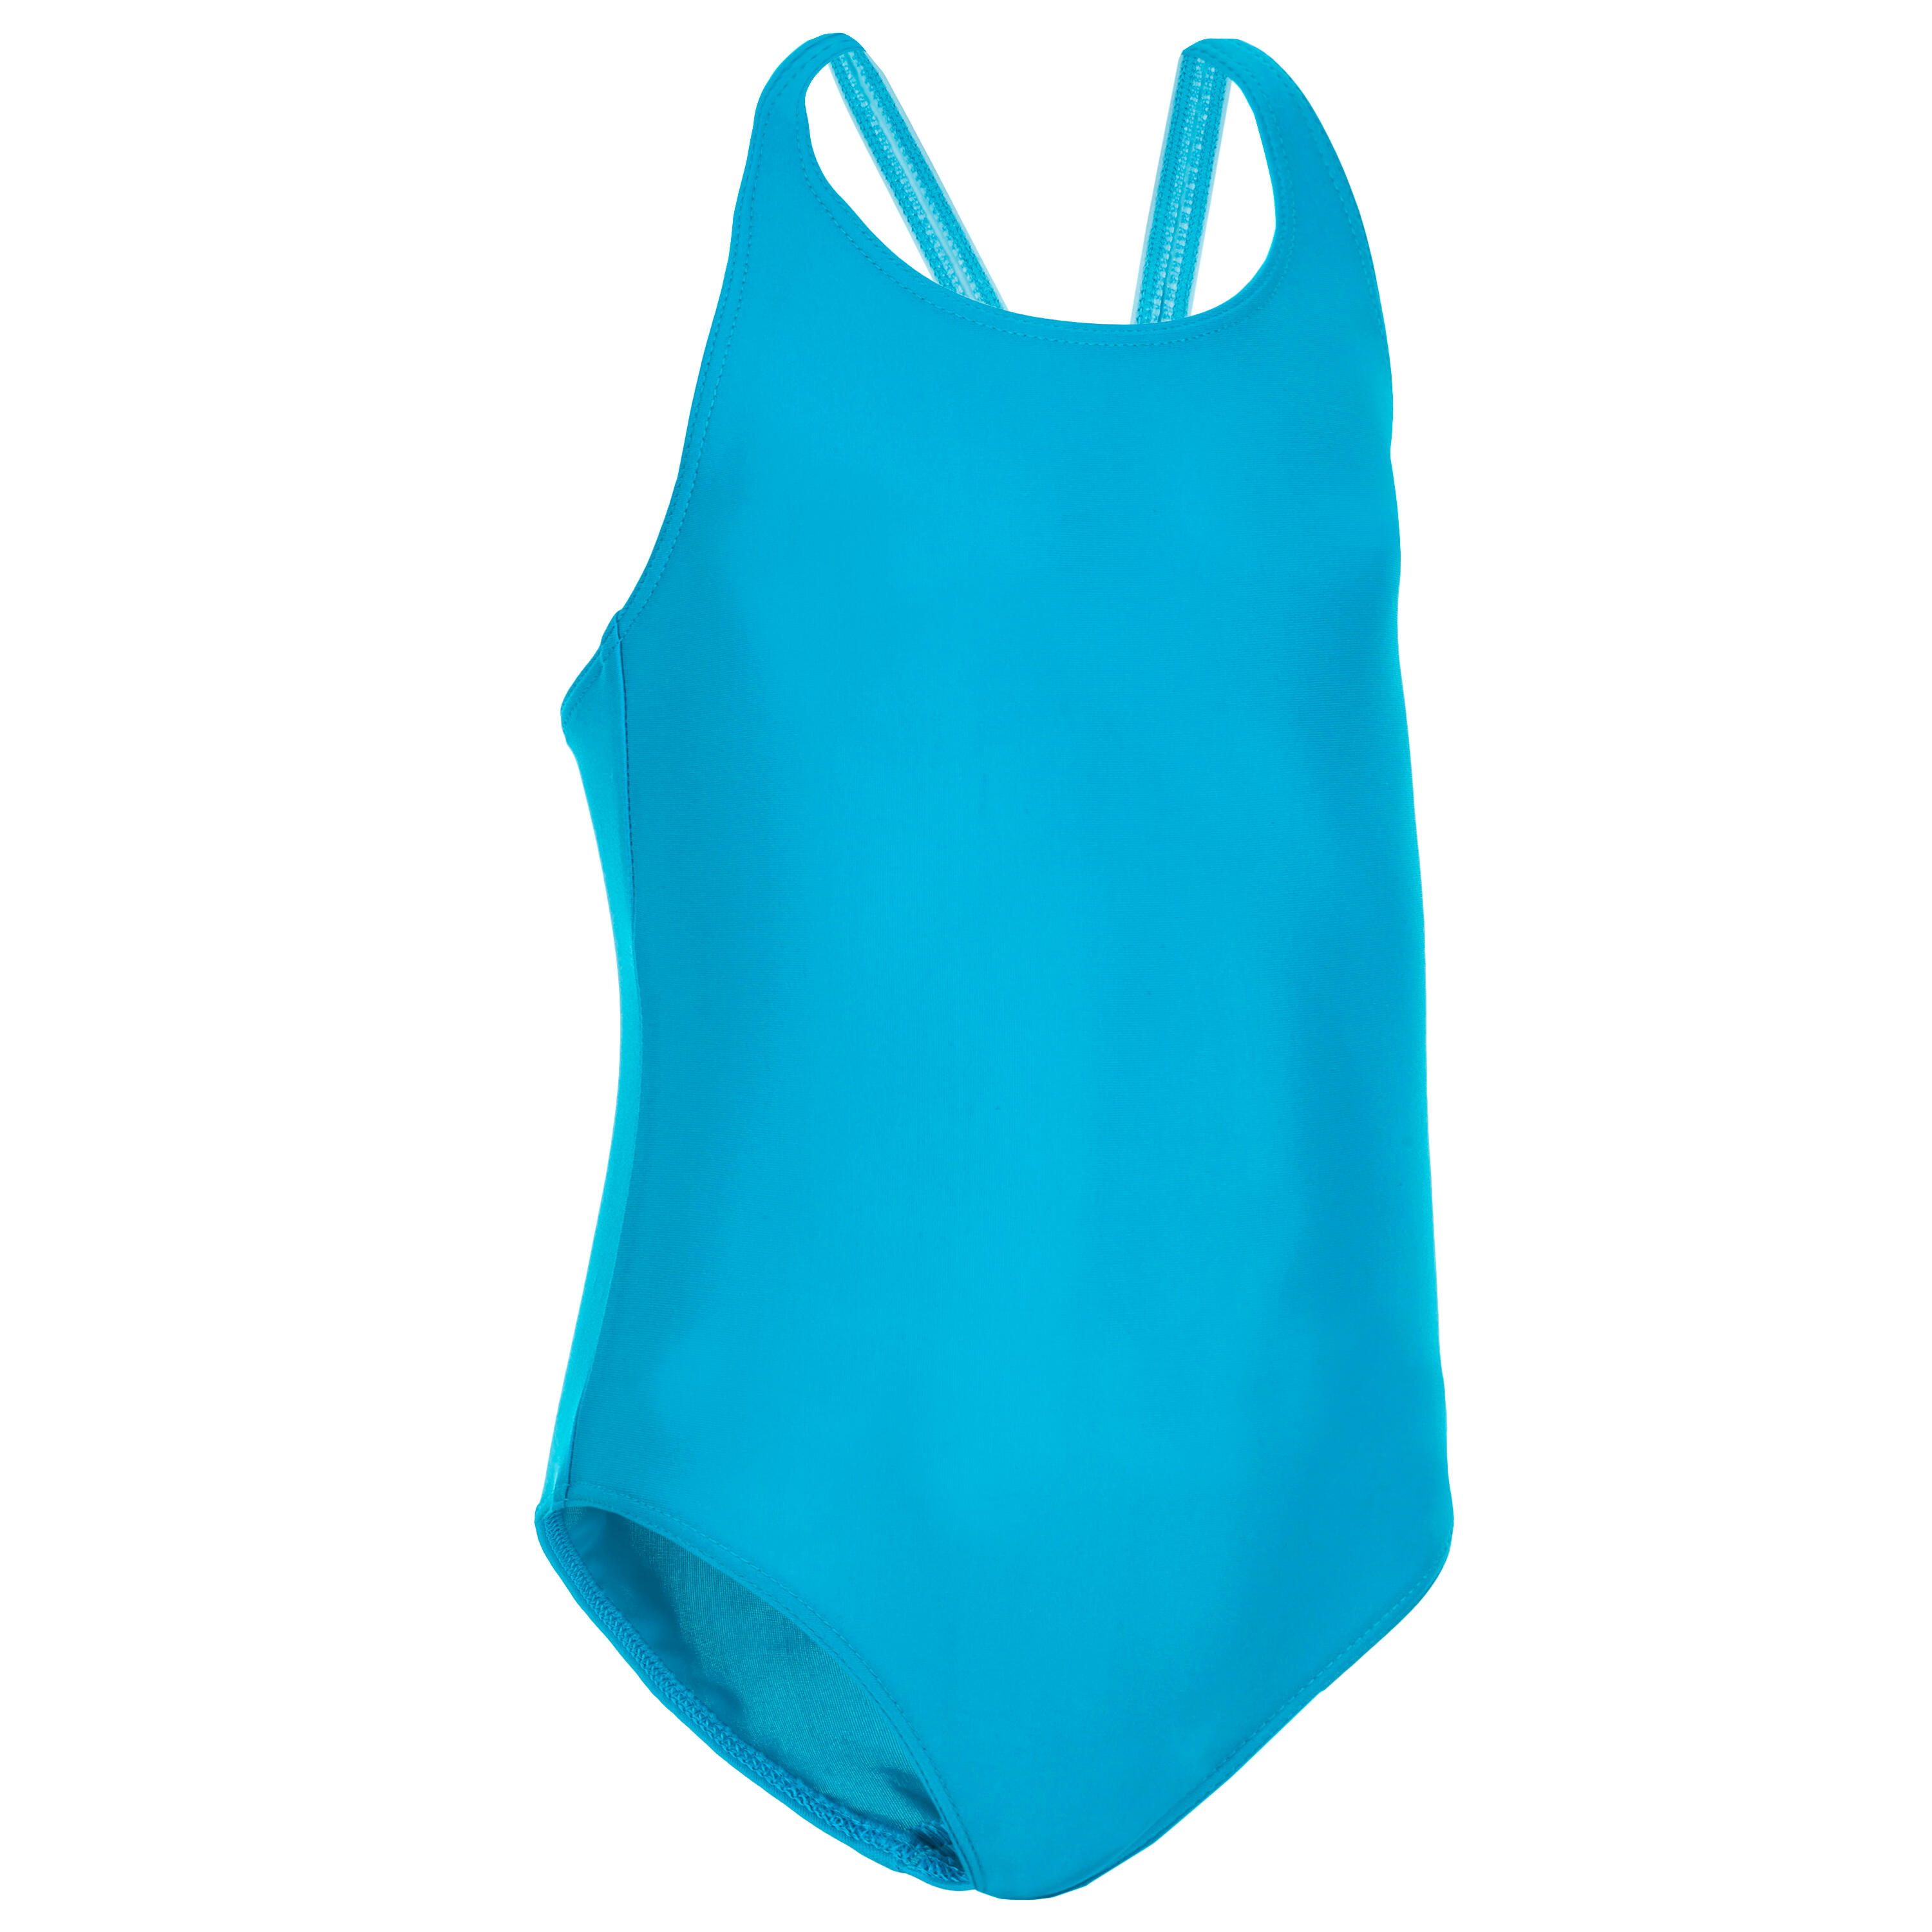 Babies Swimsuits - Swimsuits for Babies 